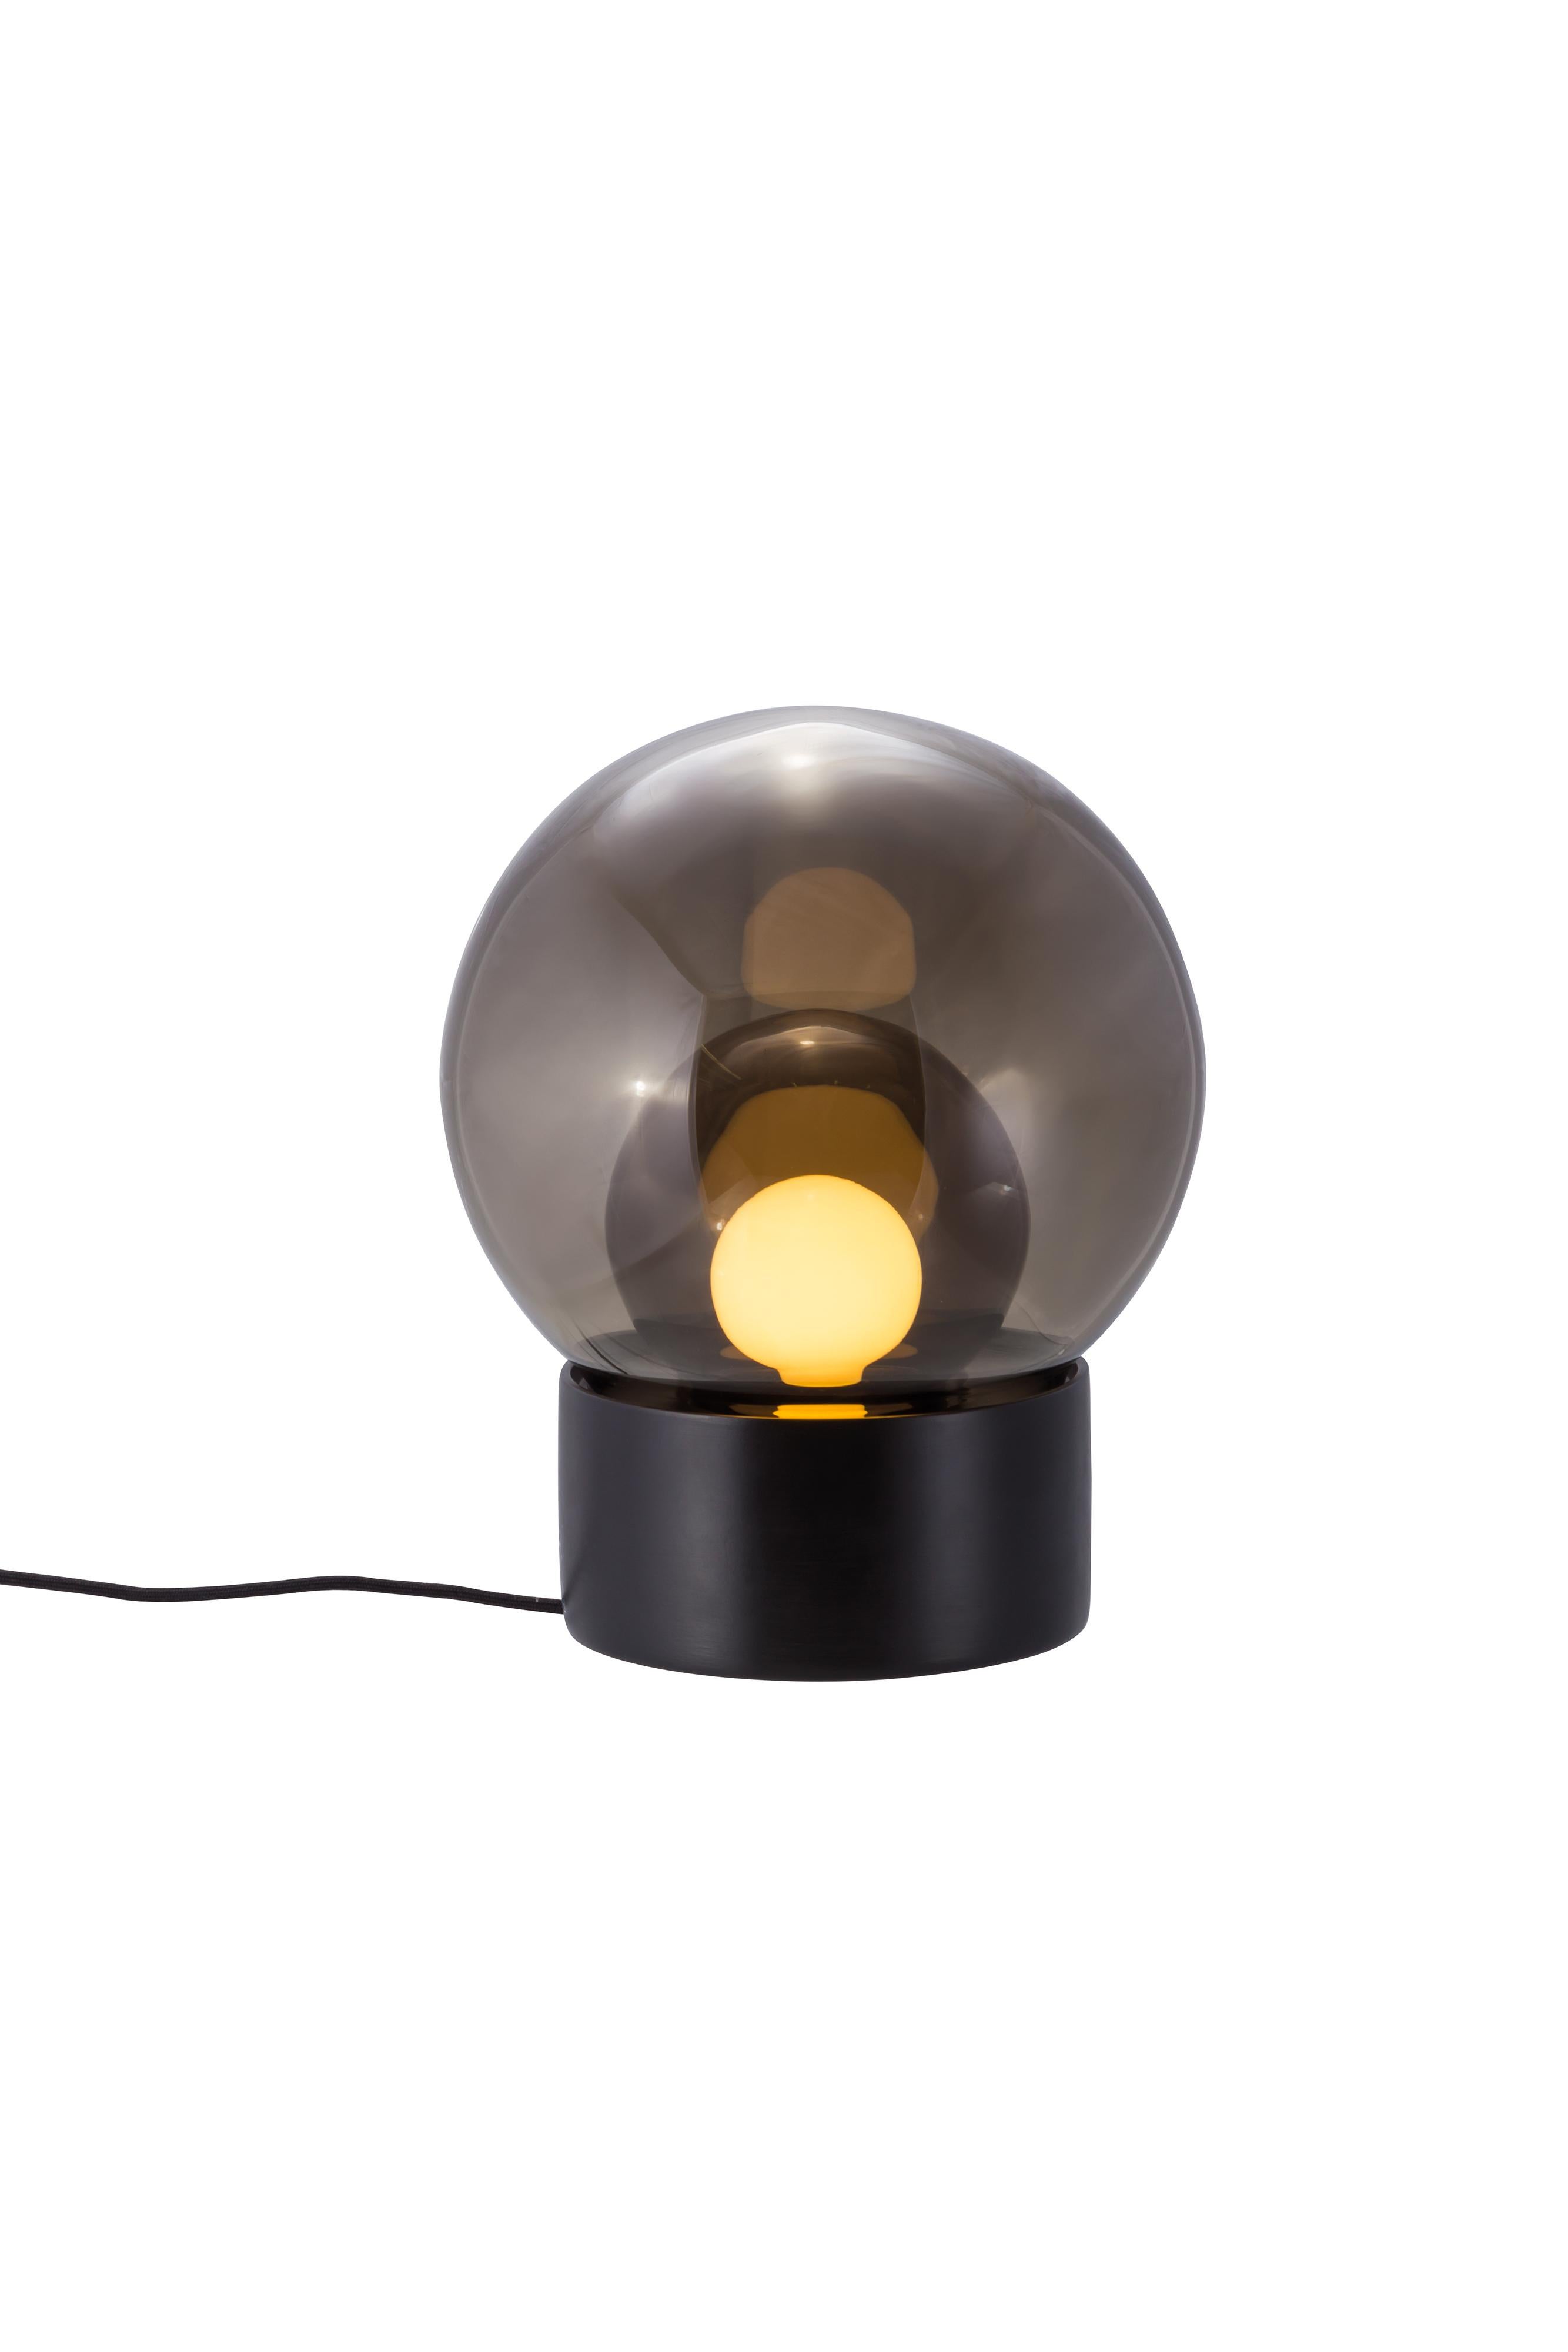 Boule Small Smoky Grey Smoky Grey Black Table Lamp by Pulpo
Dimensions: D29 x H35.5 cm
Materials: ceramic, handblown glass, coloured, textile.

Also available in different finishes: transparent  opal white black,  transparent  smoky grey black,